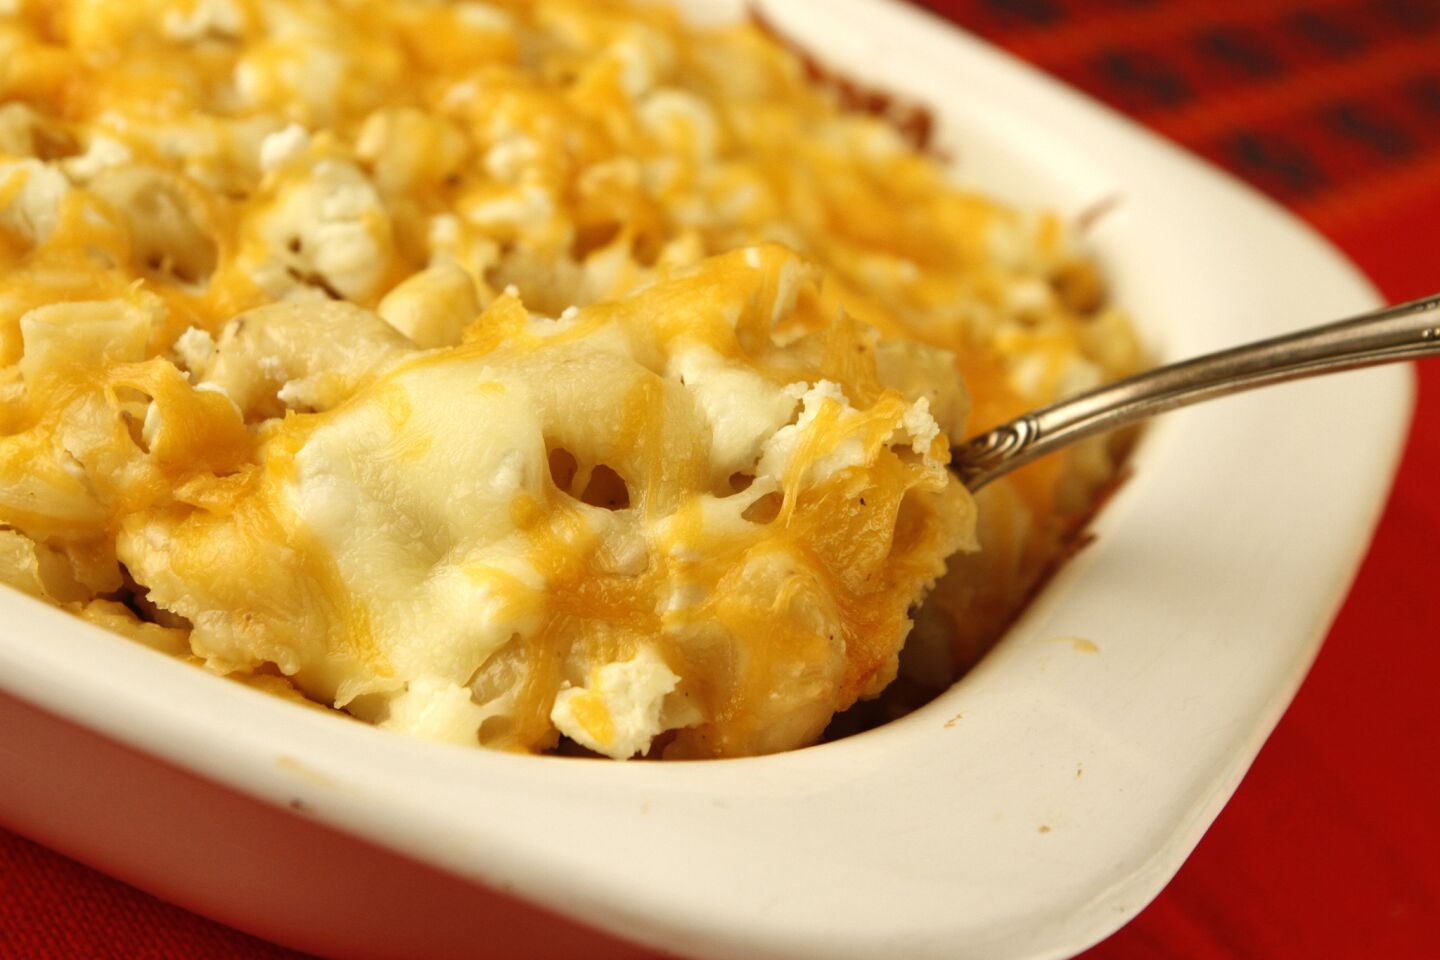 This creamy version contains no less than four kinds of cheese.